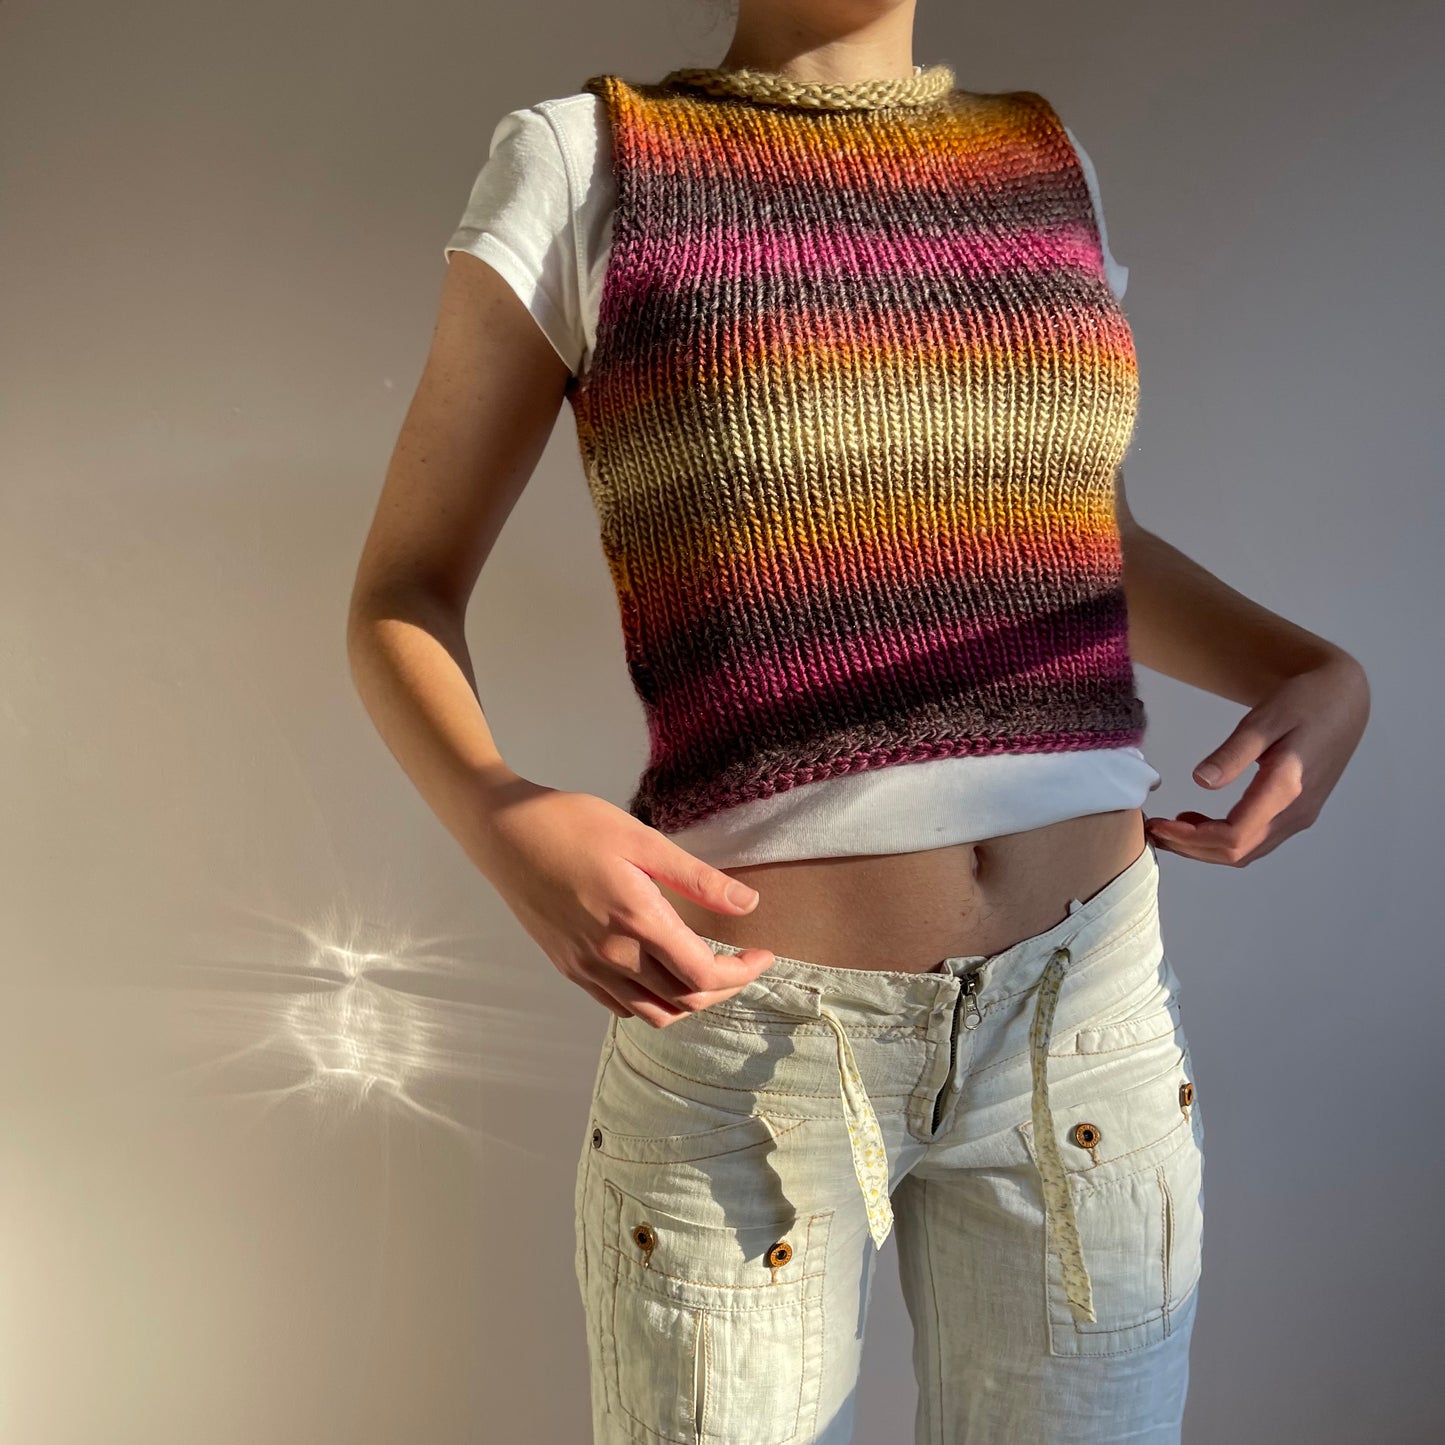 The Sunset Shades Vest - handmade knitted sweater vest